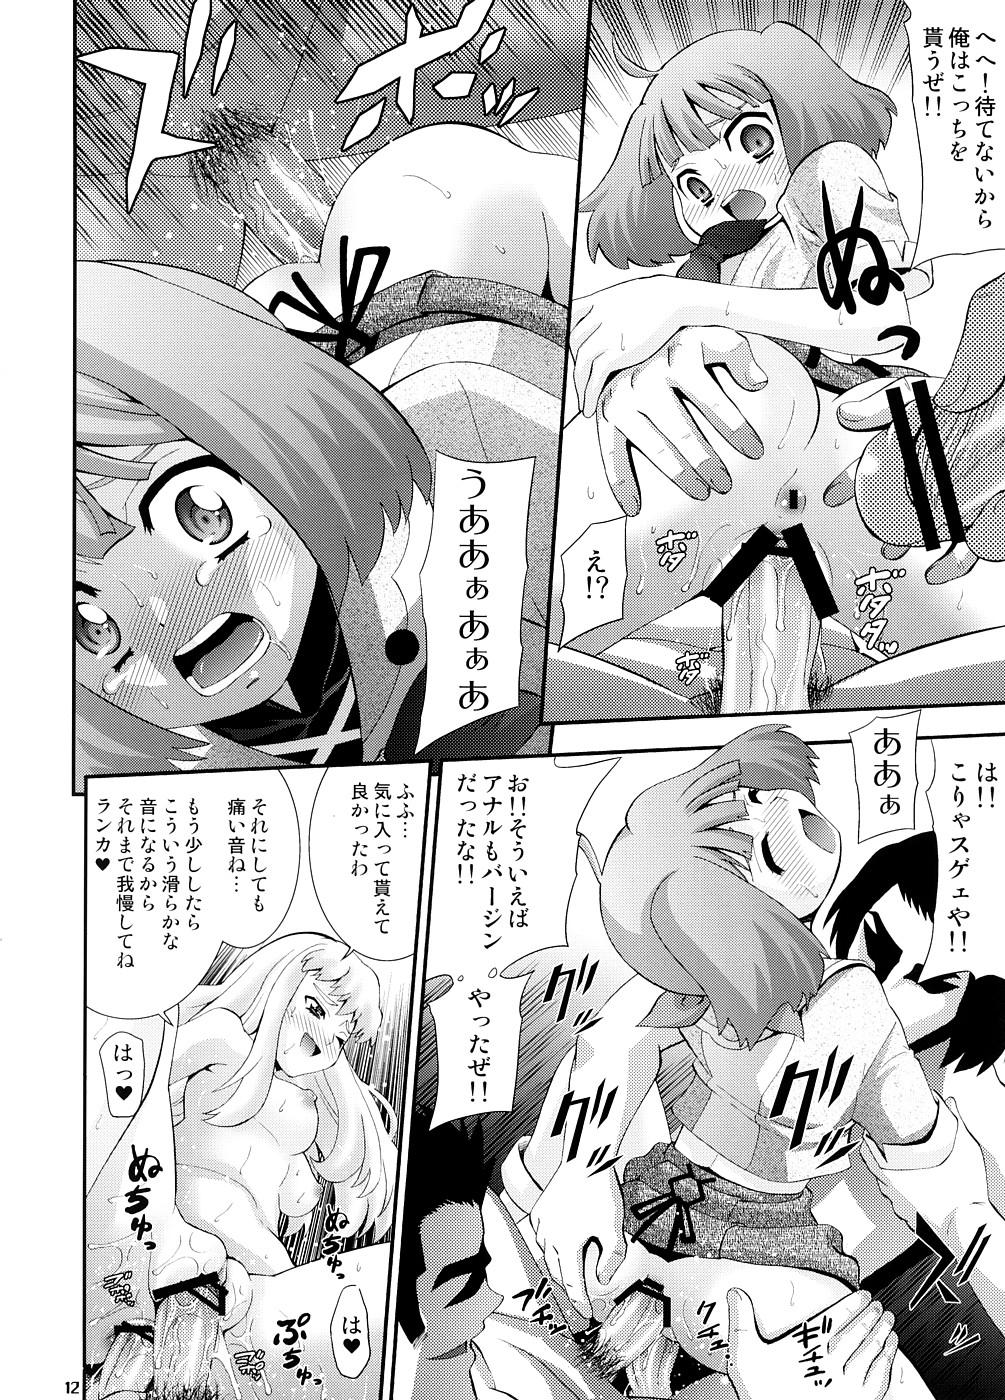 Ejaculation Song Bird - Macross frontier Tinytits - Page 11